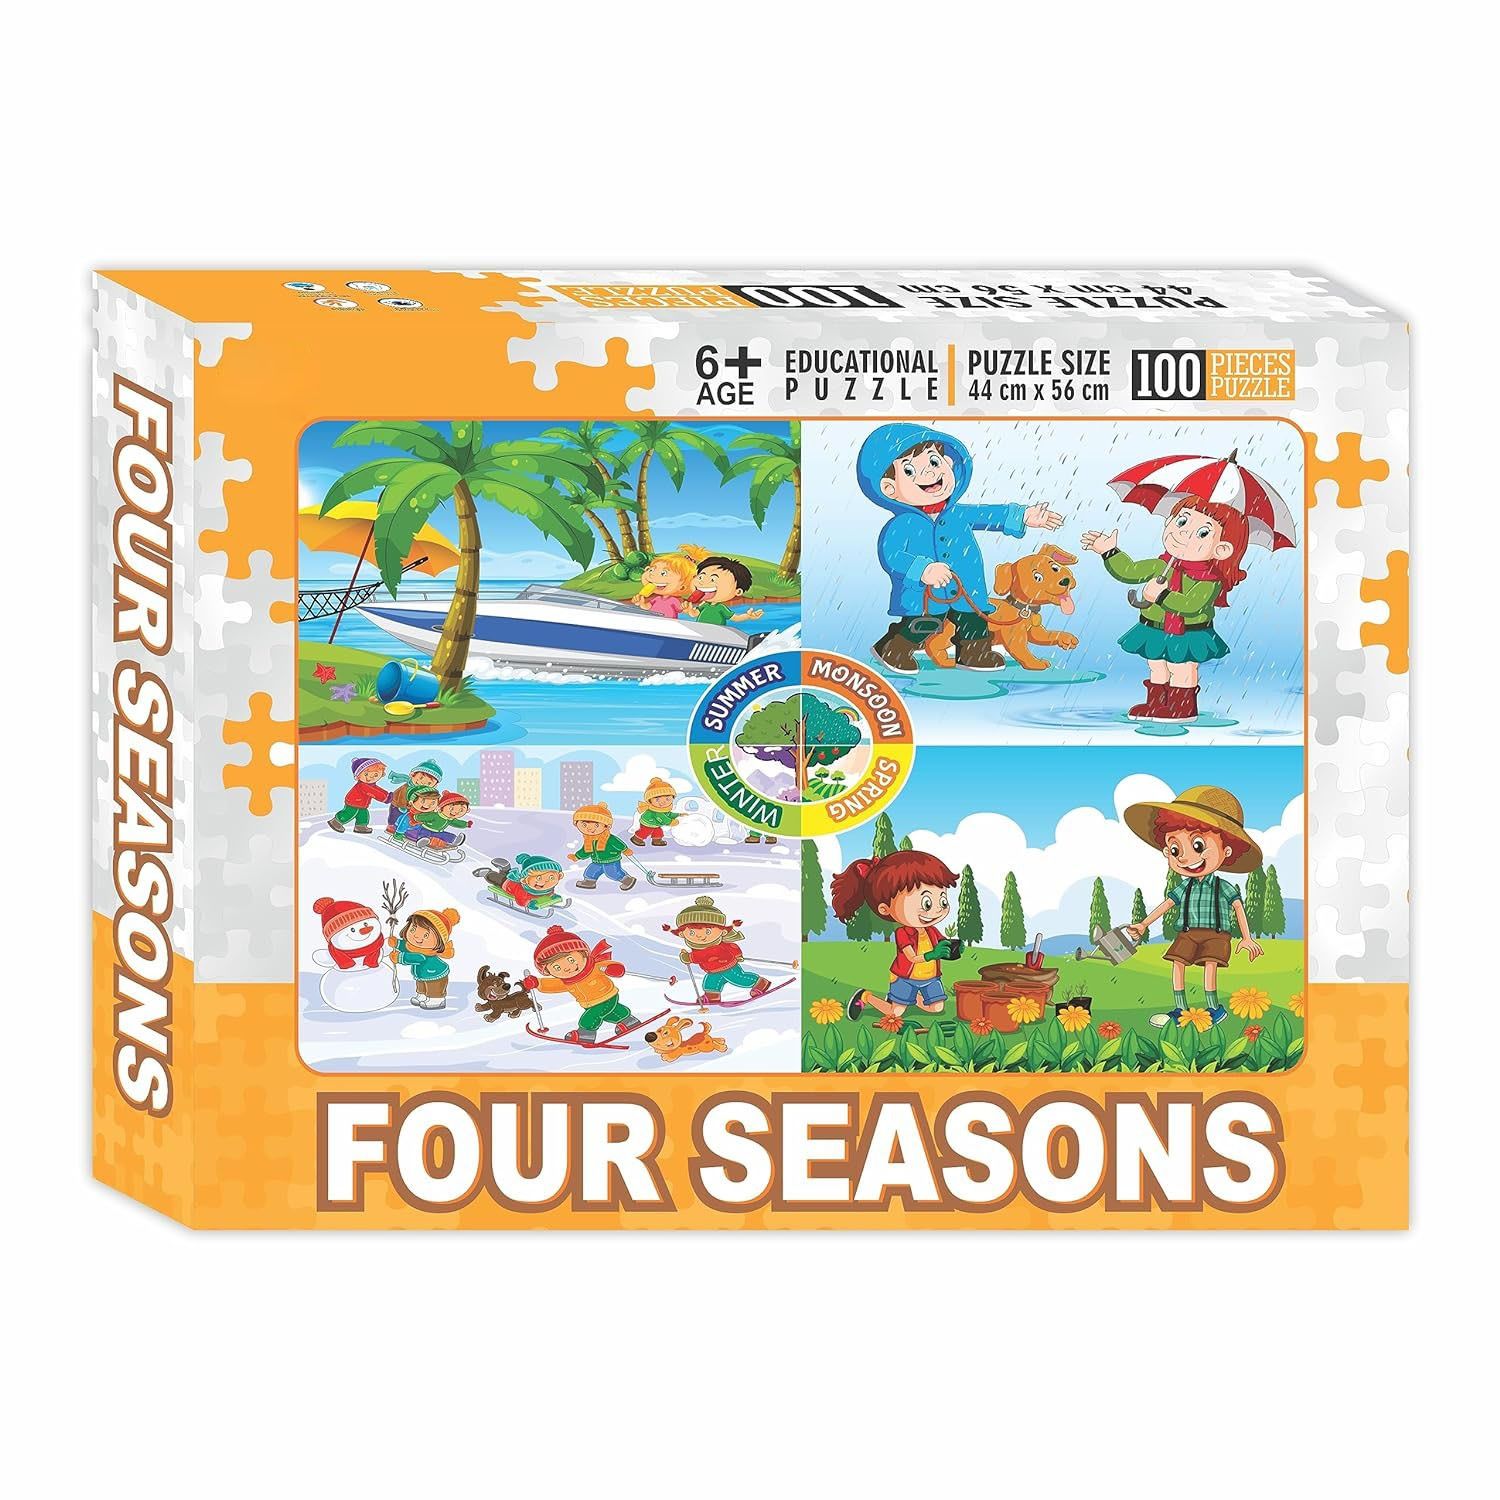 Seema Kitchenware Toys & Games Teenager Four Seasons Jigsaw Puzzles|Educational Puzzle & Games for Focus and Memory with Vibrant Colors|100 Pieces Puzzles (Set of 1 Puzzles in Box) for Age 4 Years and Above